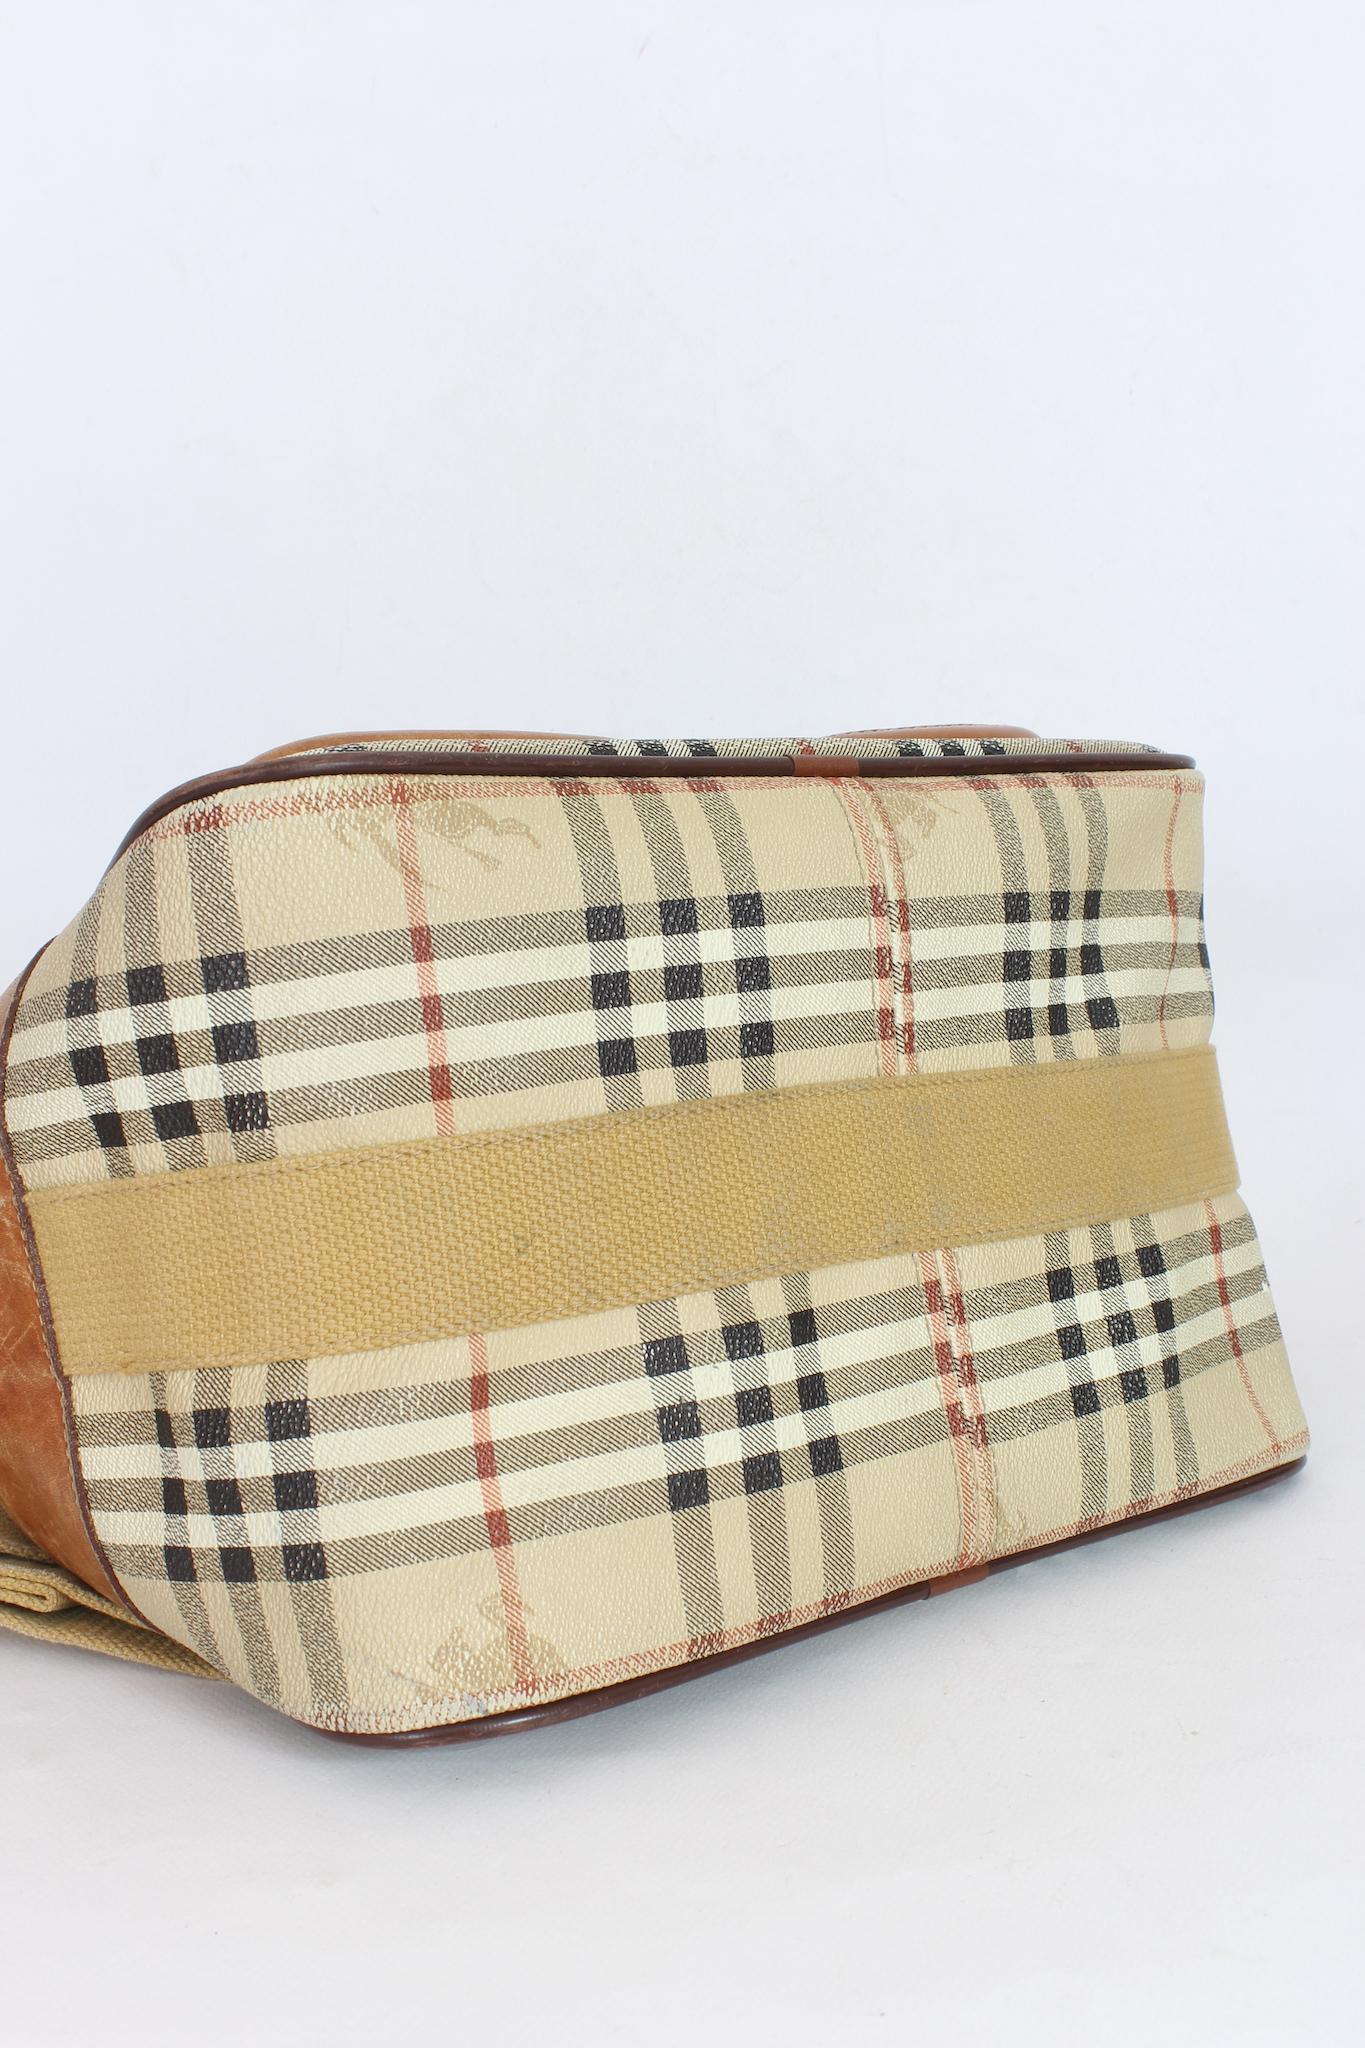 Burberry vintage 80s trunk bag. Shoulder bag with adjustable shoulder strap, beige and brown checked pattern. External pockets, zip and clip button closure. Canvas and leather fabric. Good general condition, there are signs of use.

Height: 28